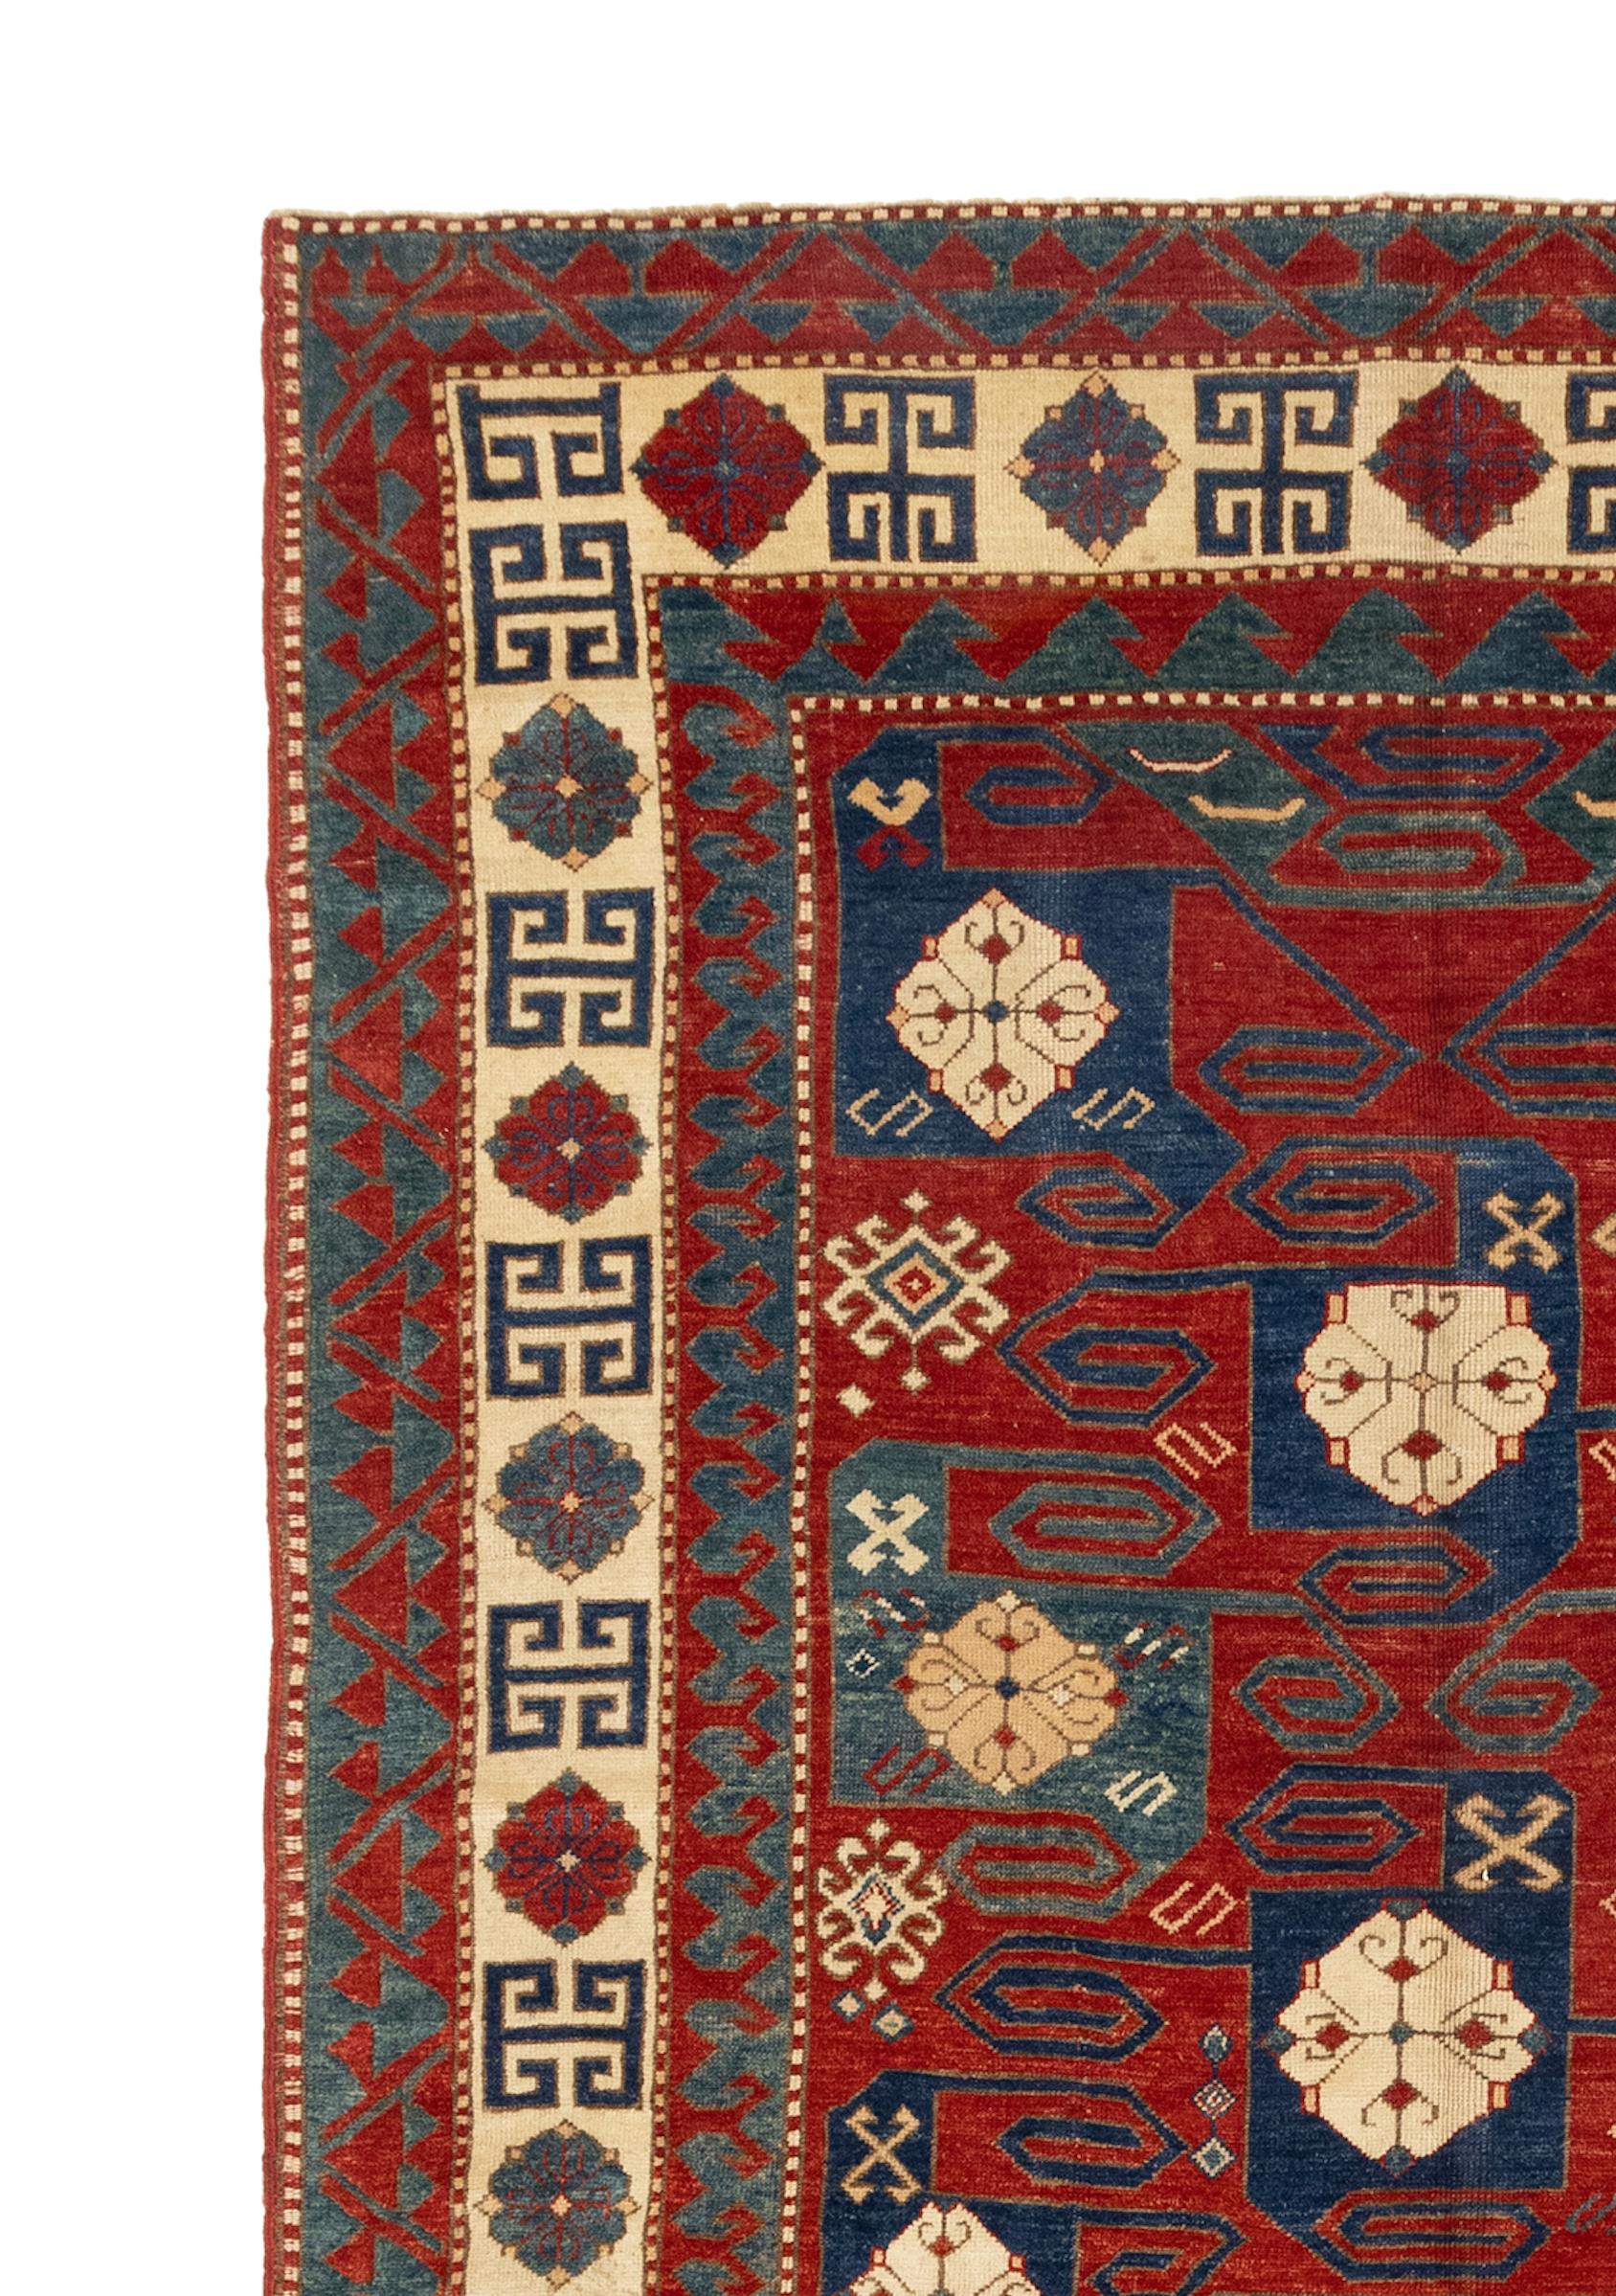 This is a beautiful pinwheel Kazak inspired from the antique Kazak pinwheel rugs of 19th century. Vivacious colors of a rich red background coming together with ivory blues, navy, and greens give the rug a unique presentation of the line work within.